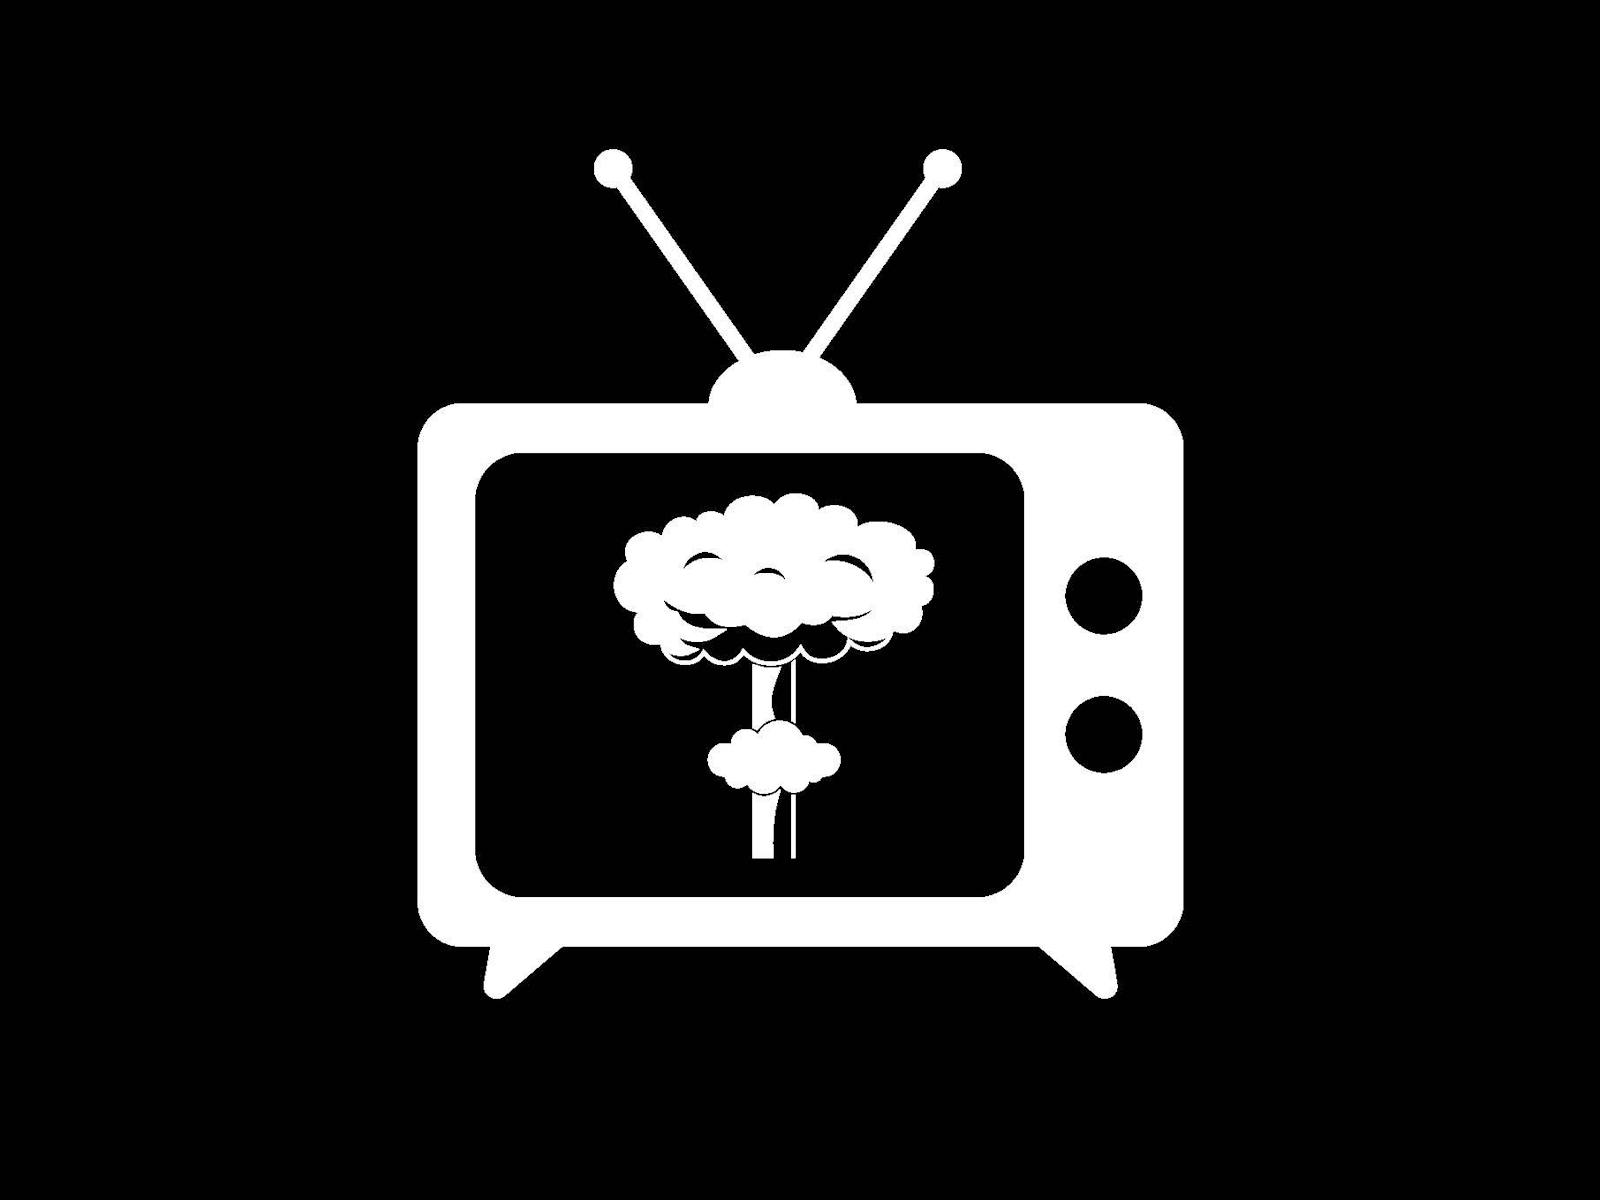 Image of black and white graphic from the Mind Blown publication showing a TV with a nuclear cloud